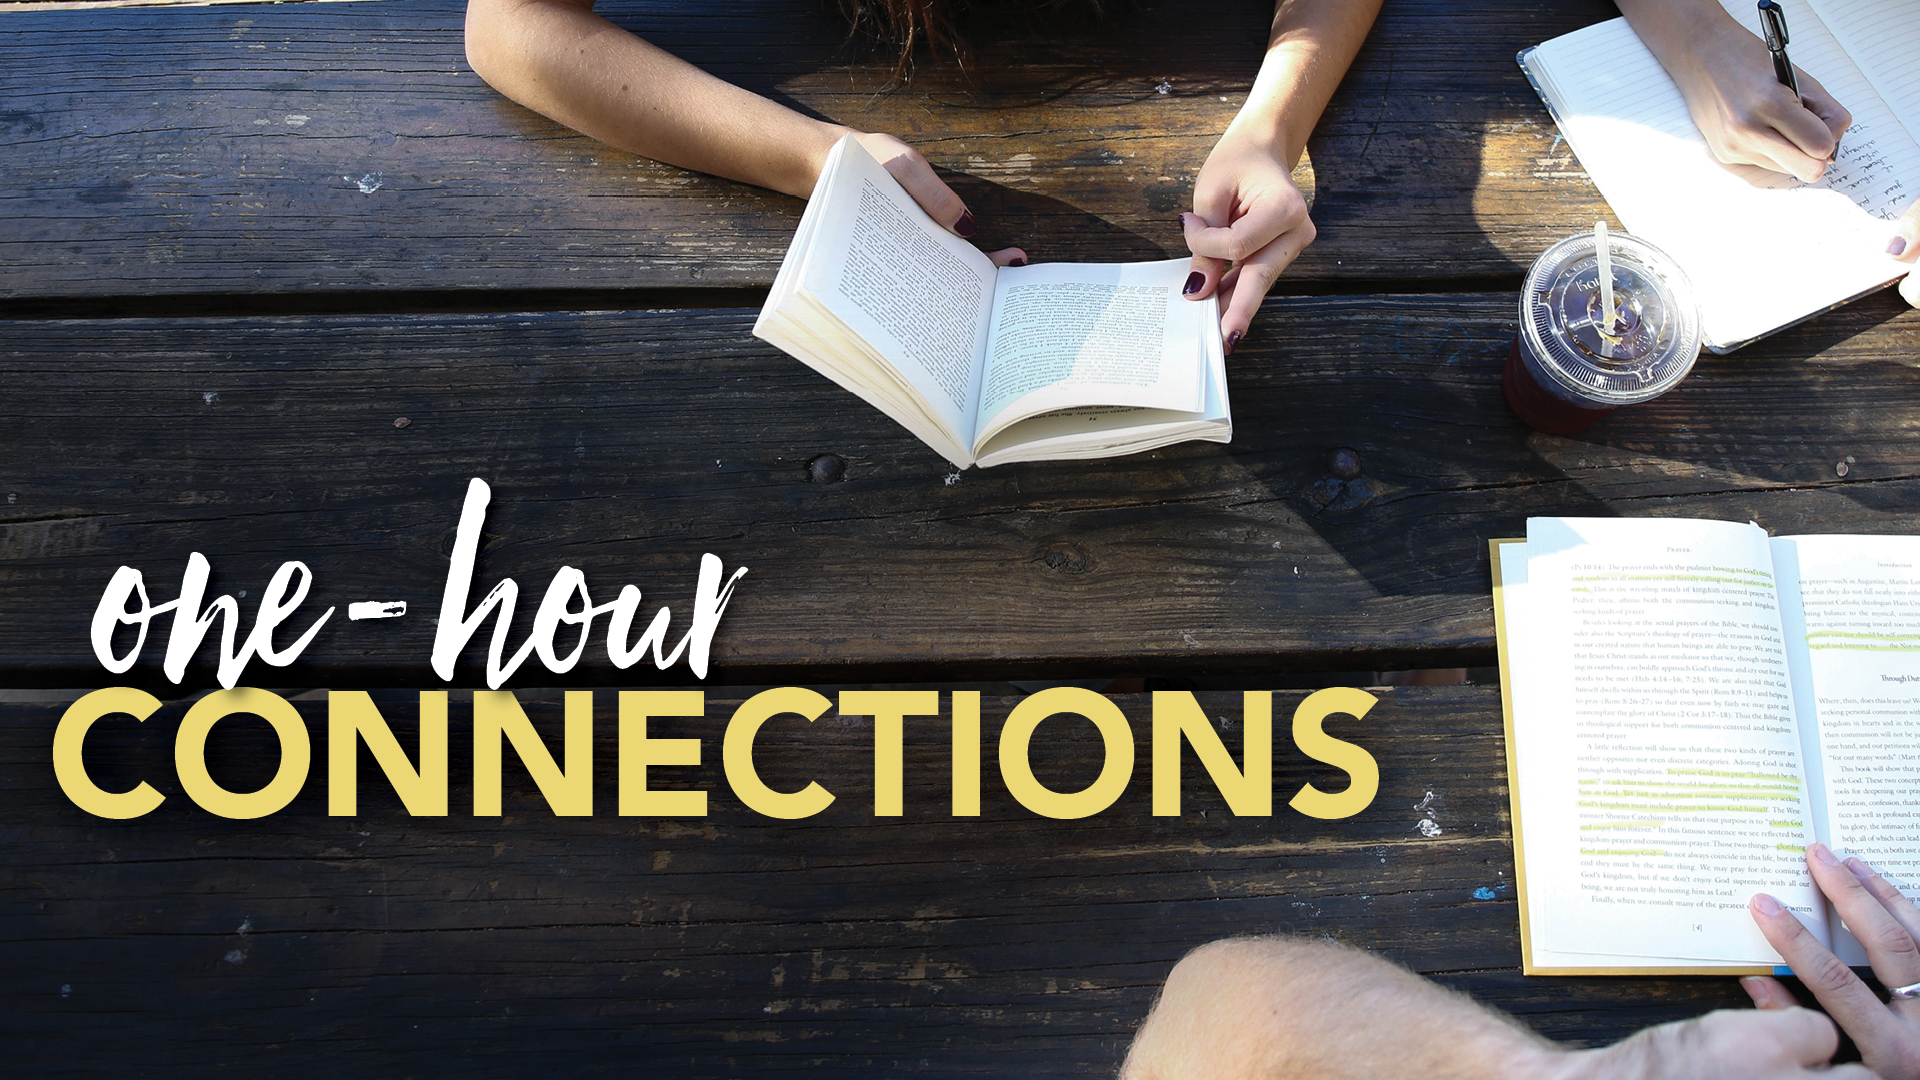 One-Hour Connections
Sundays | 8:15 a.m. | Online
